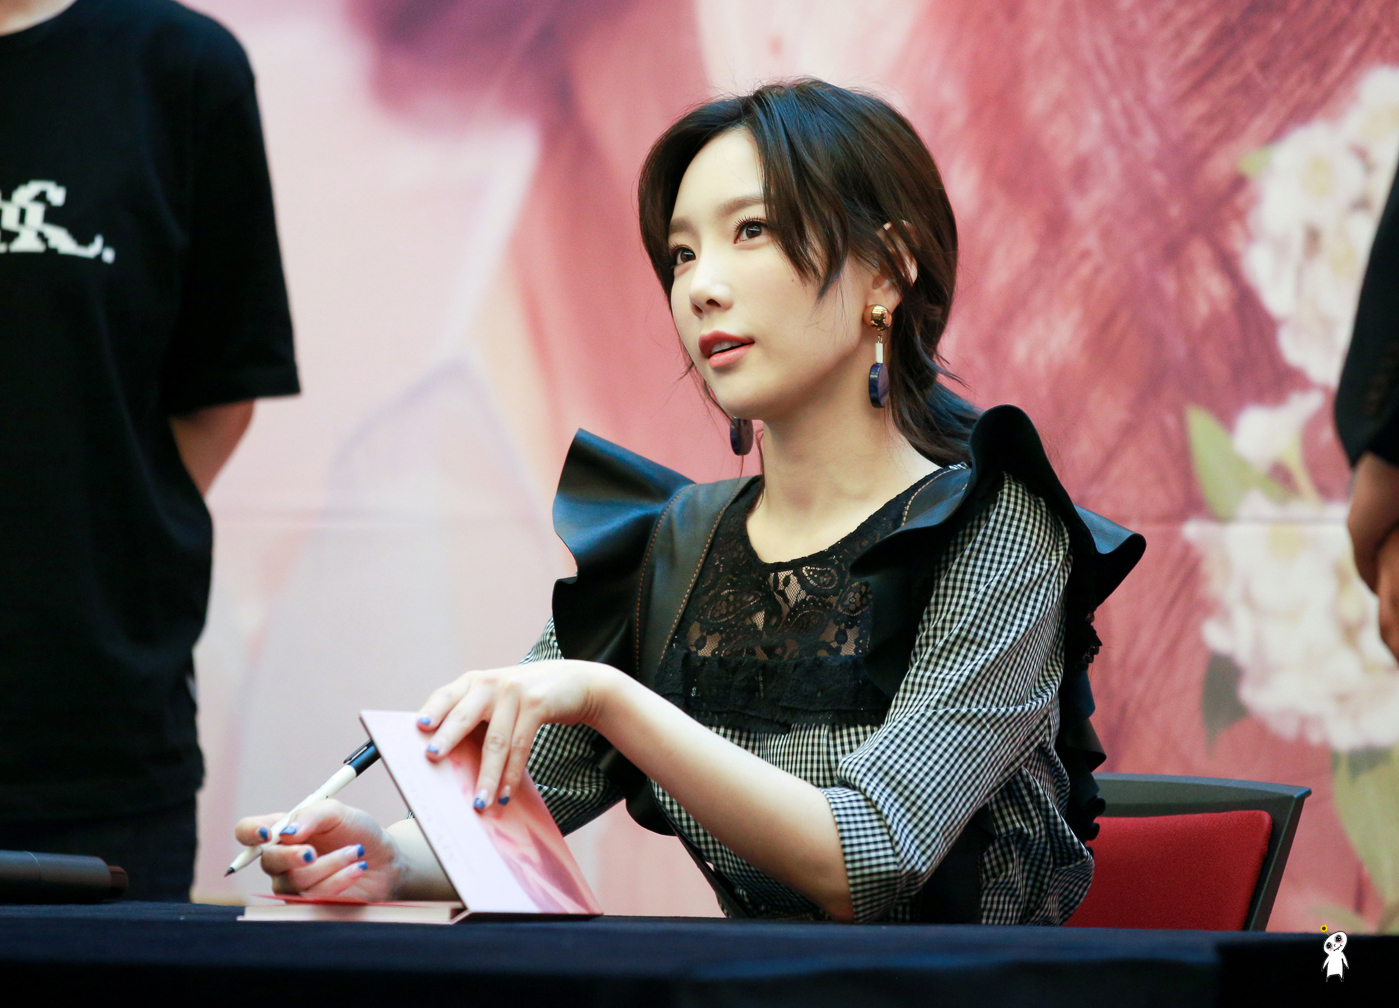 [PIC][16-04-2017]TaeYeon tham dự buổi Fansign cho “MY VOICE DELUXE EDITION” tại AK PLAZA vào chiều nay  - Page 4 2433A14C58F98CC62EDE35